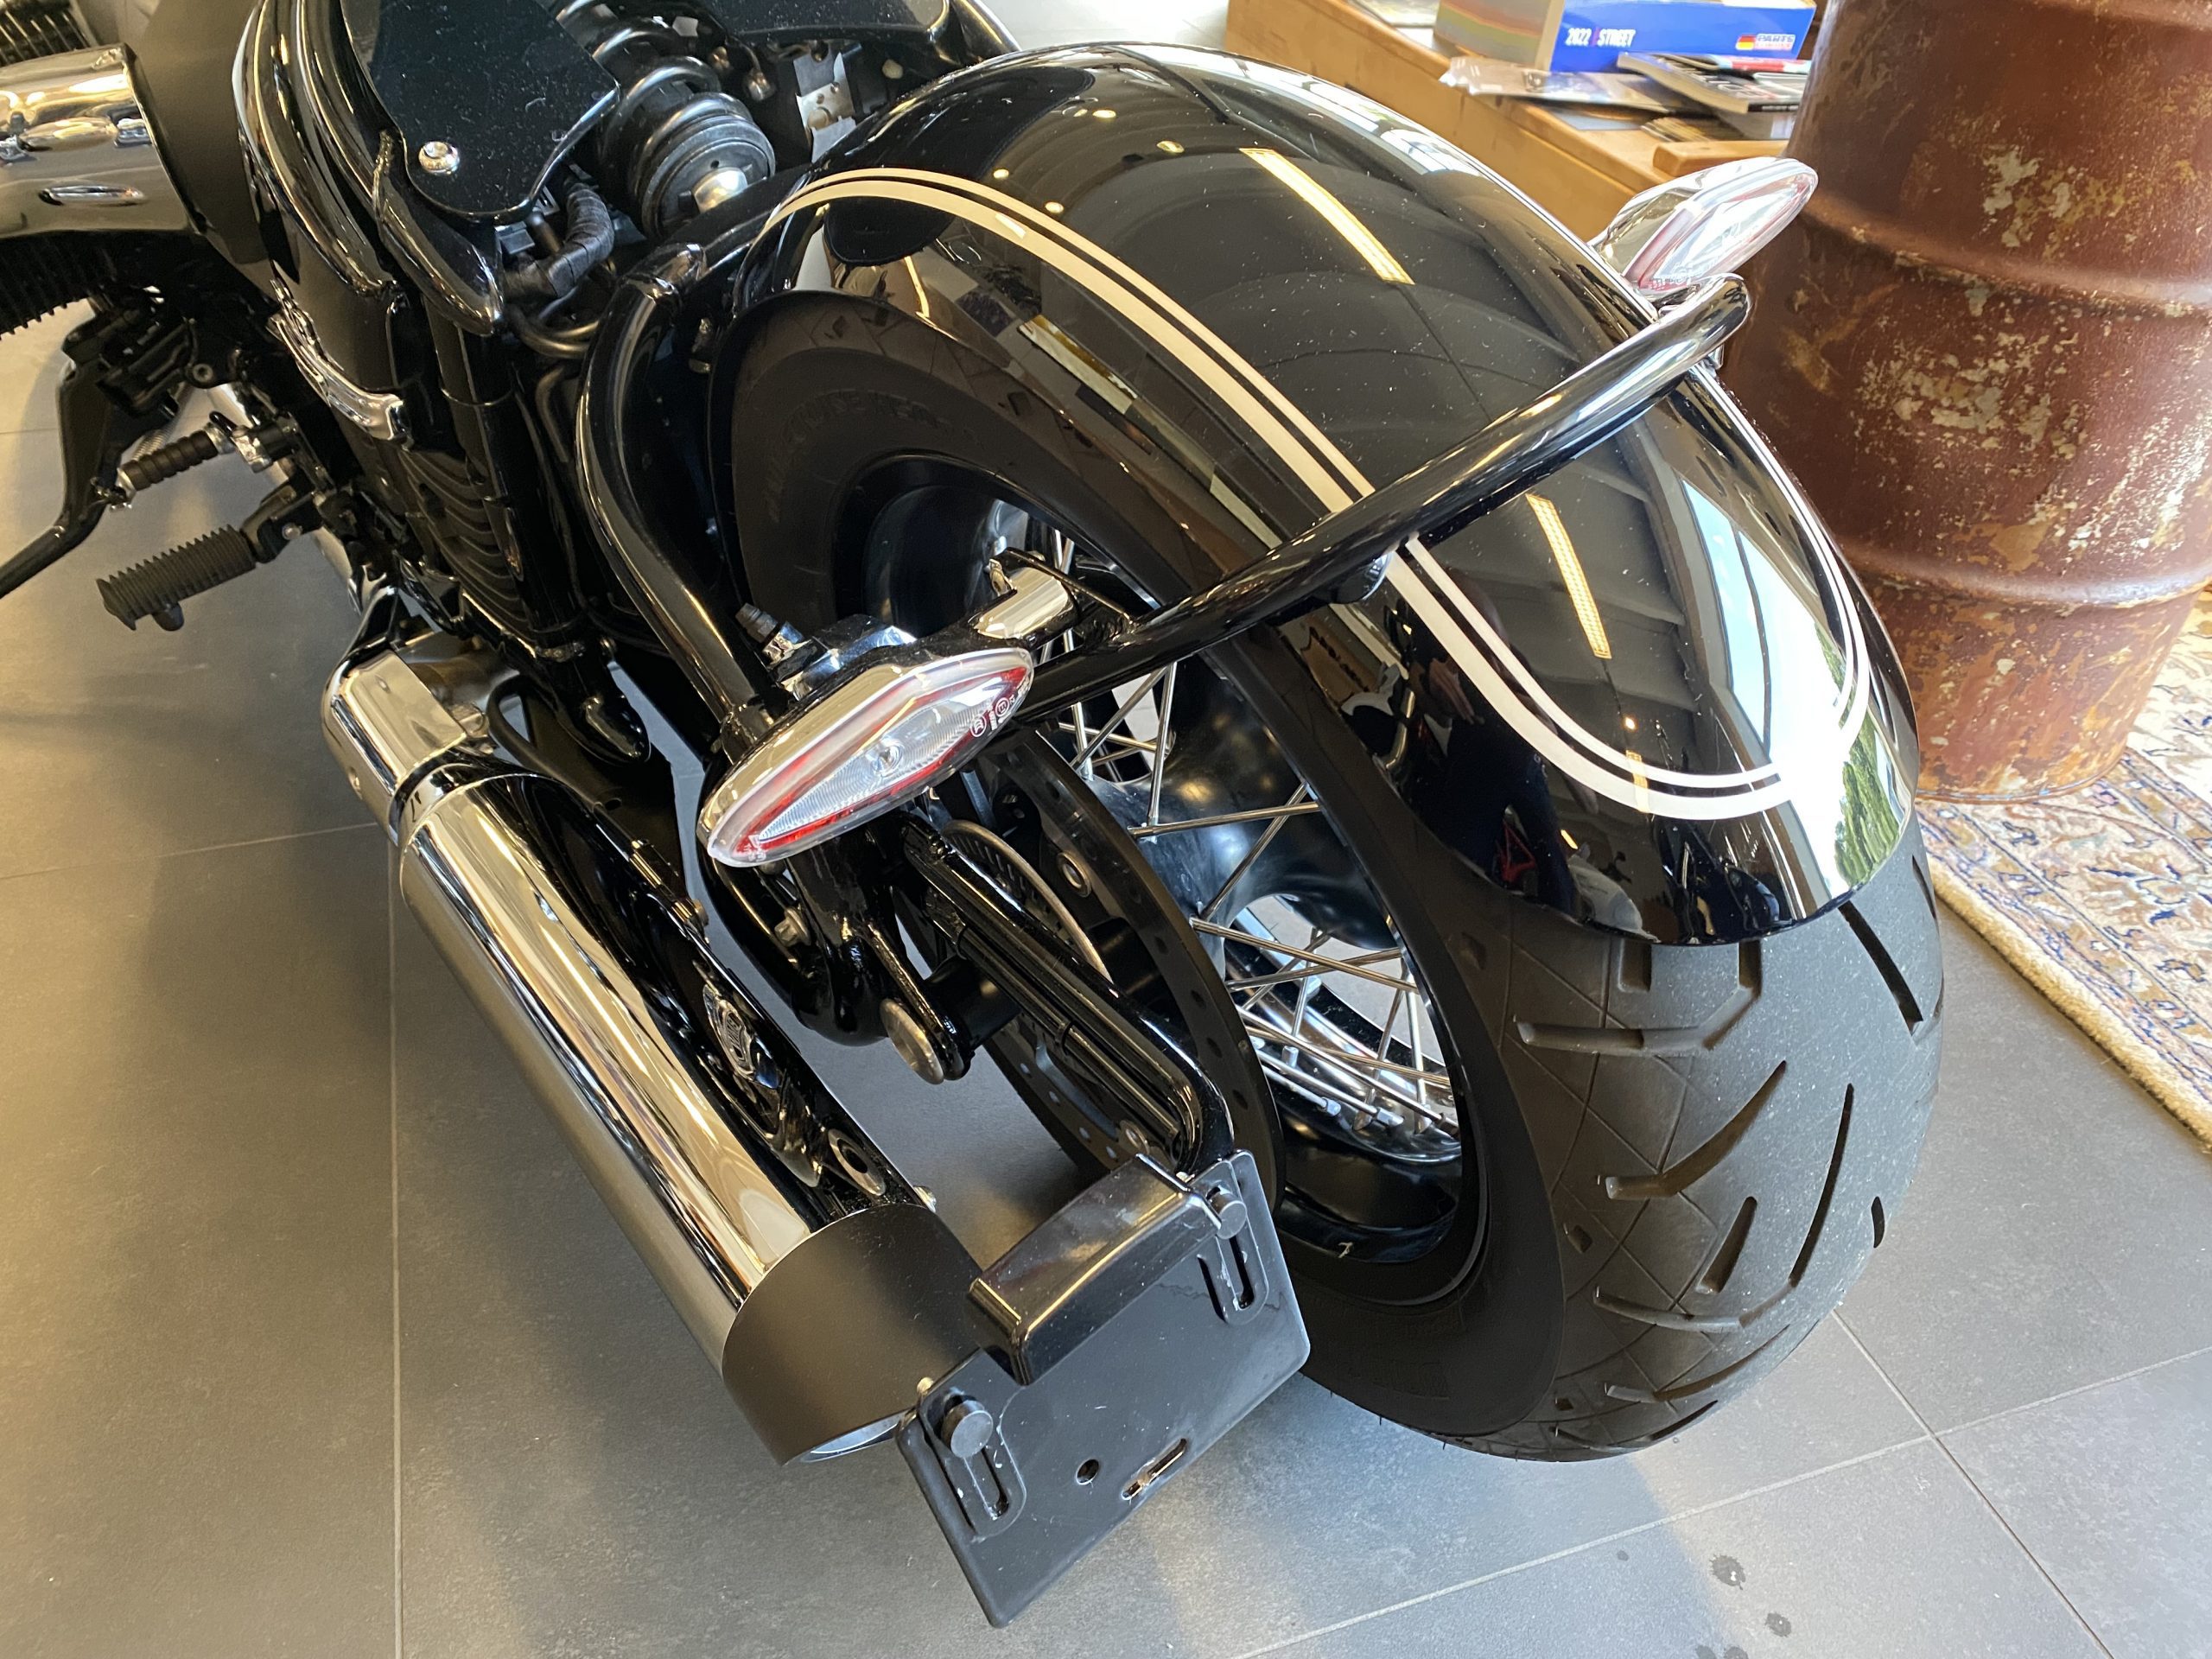 BMW R 18 customized by Michael and Bohling und Eisele, Karlsruhe